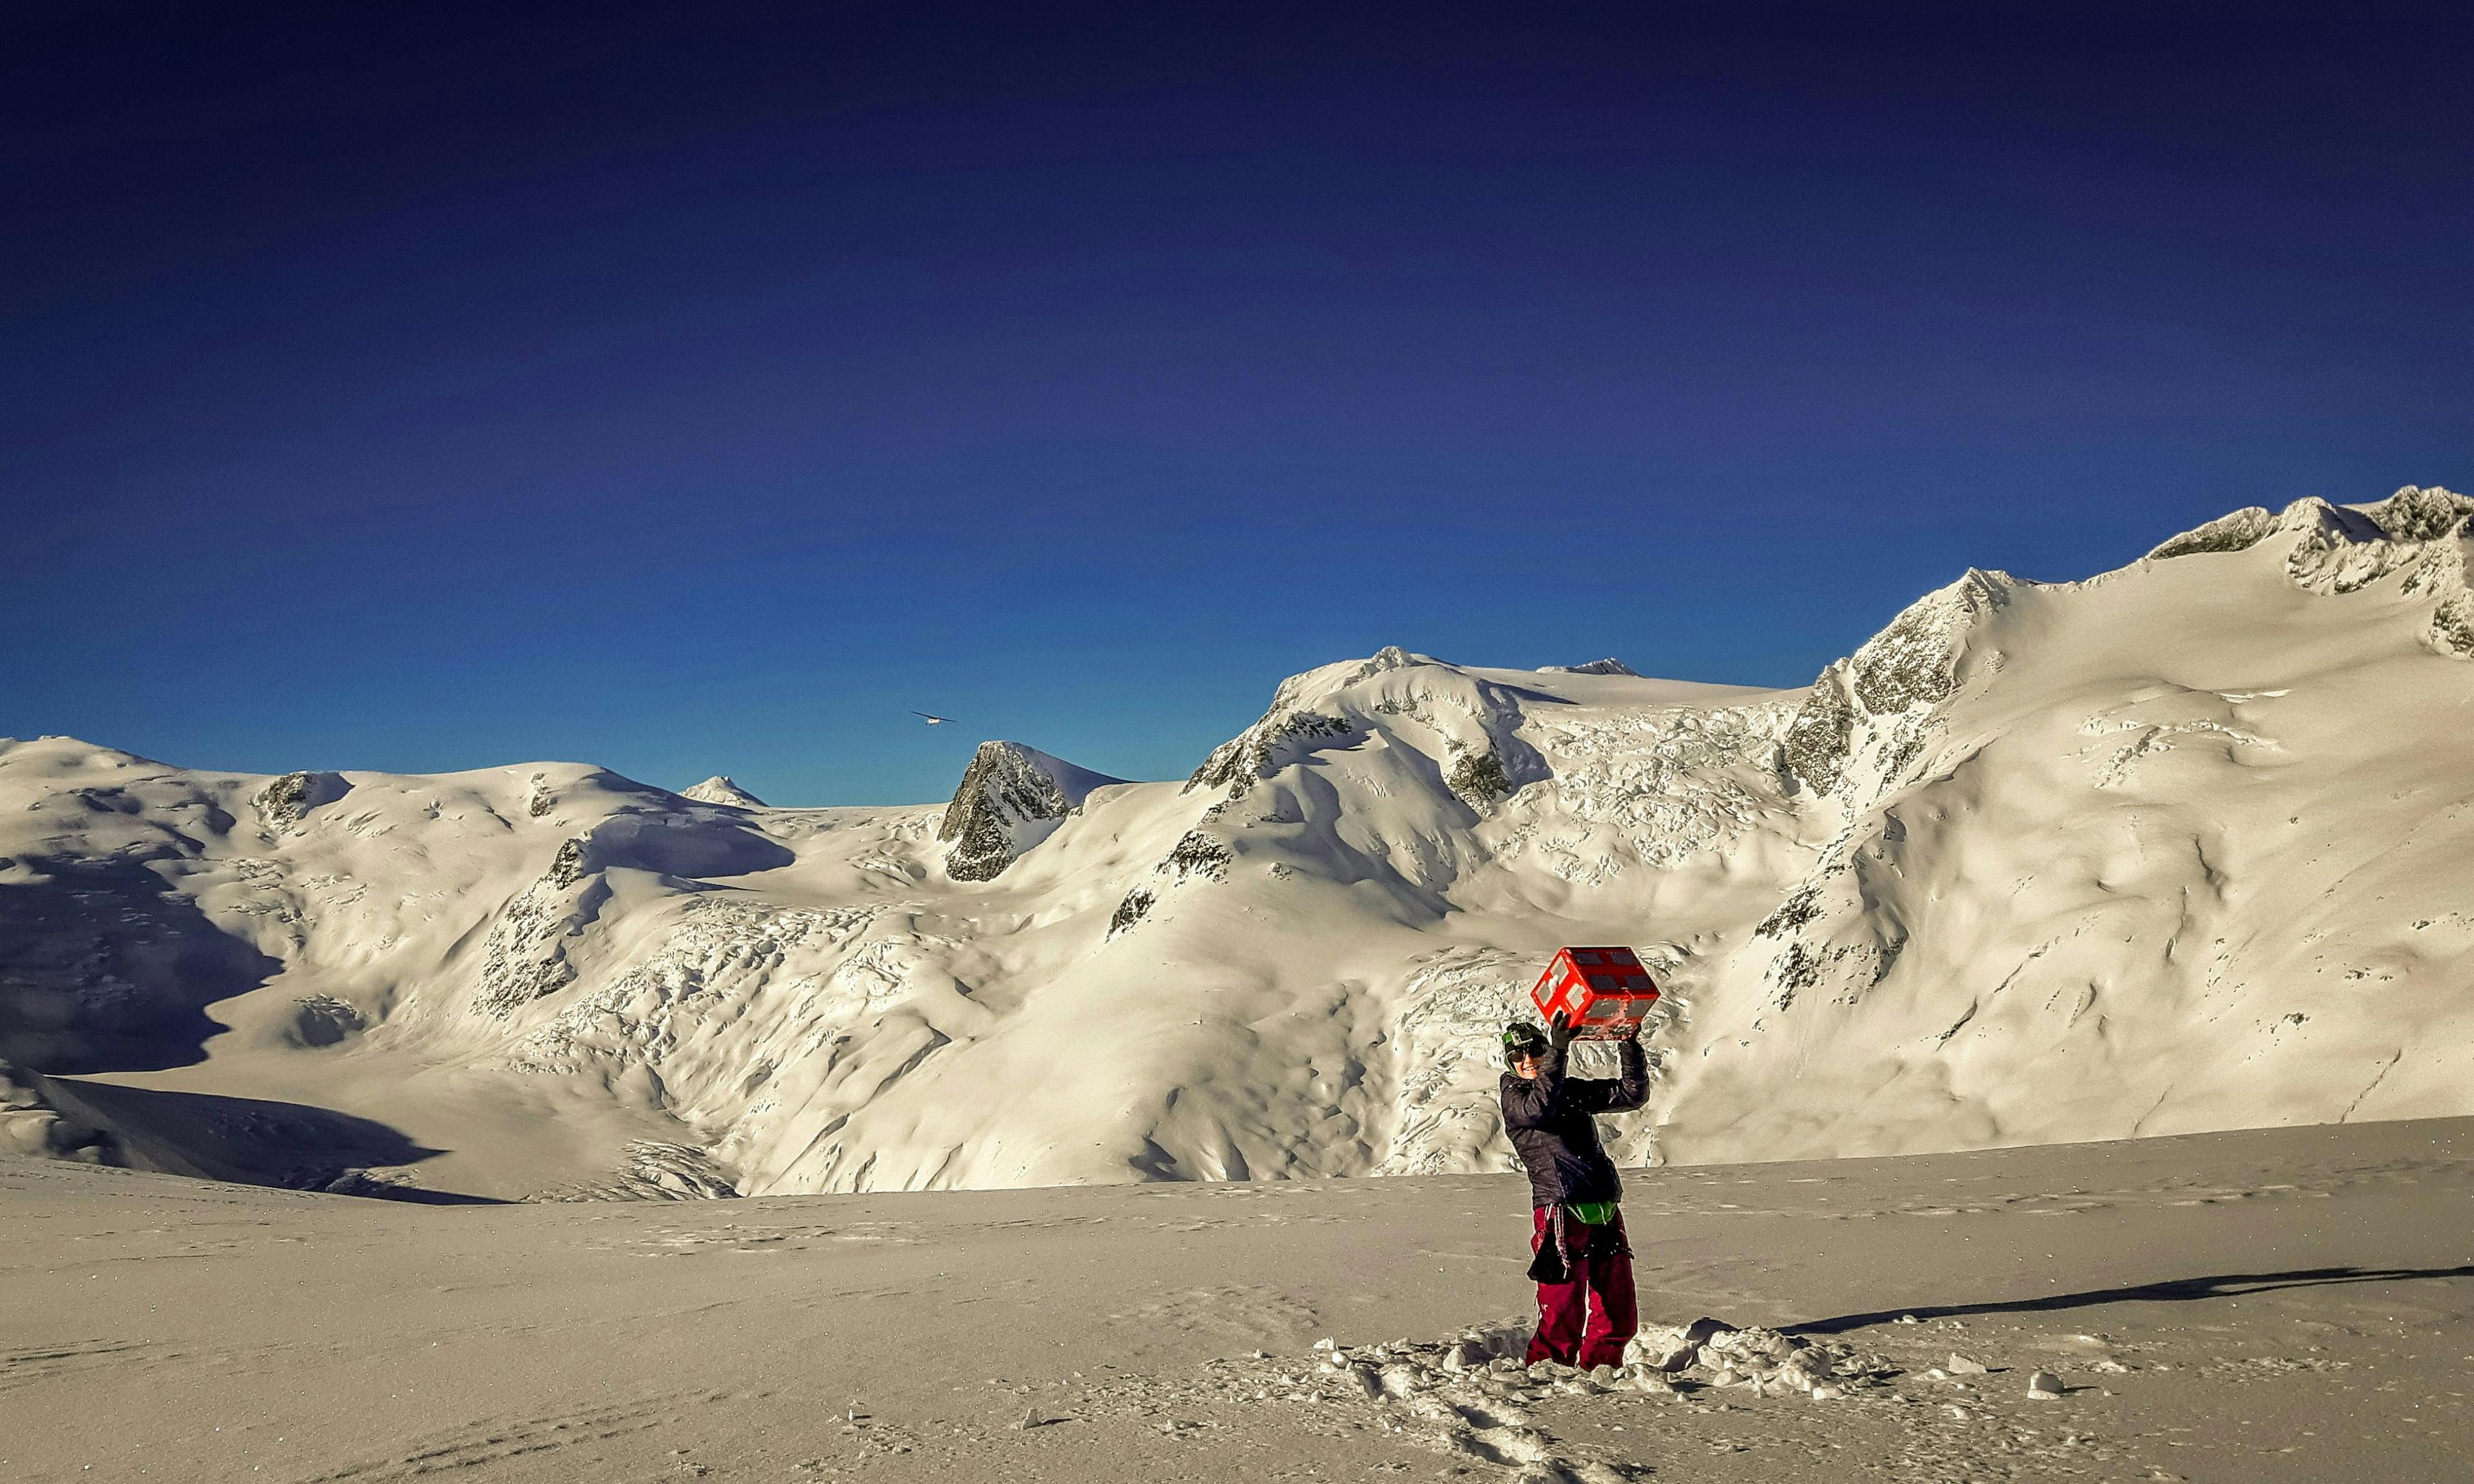 A woman holds a food box aloft while standing in the middle of a snowfield, surrounded by mountains.